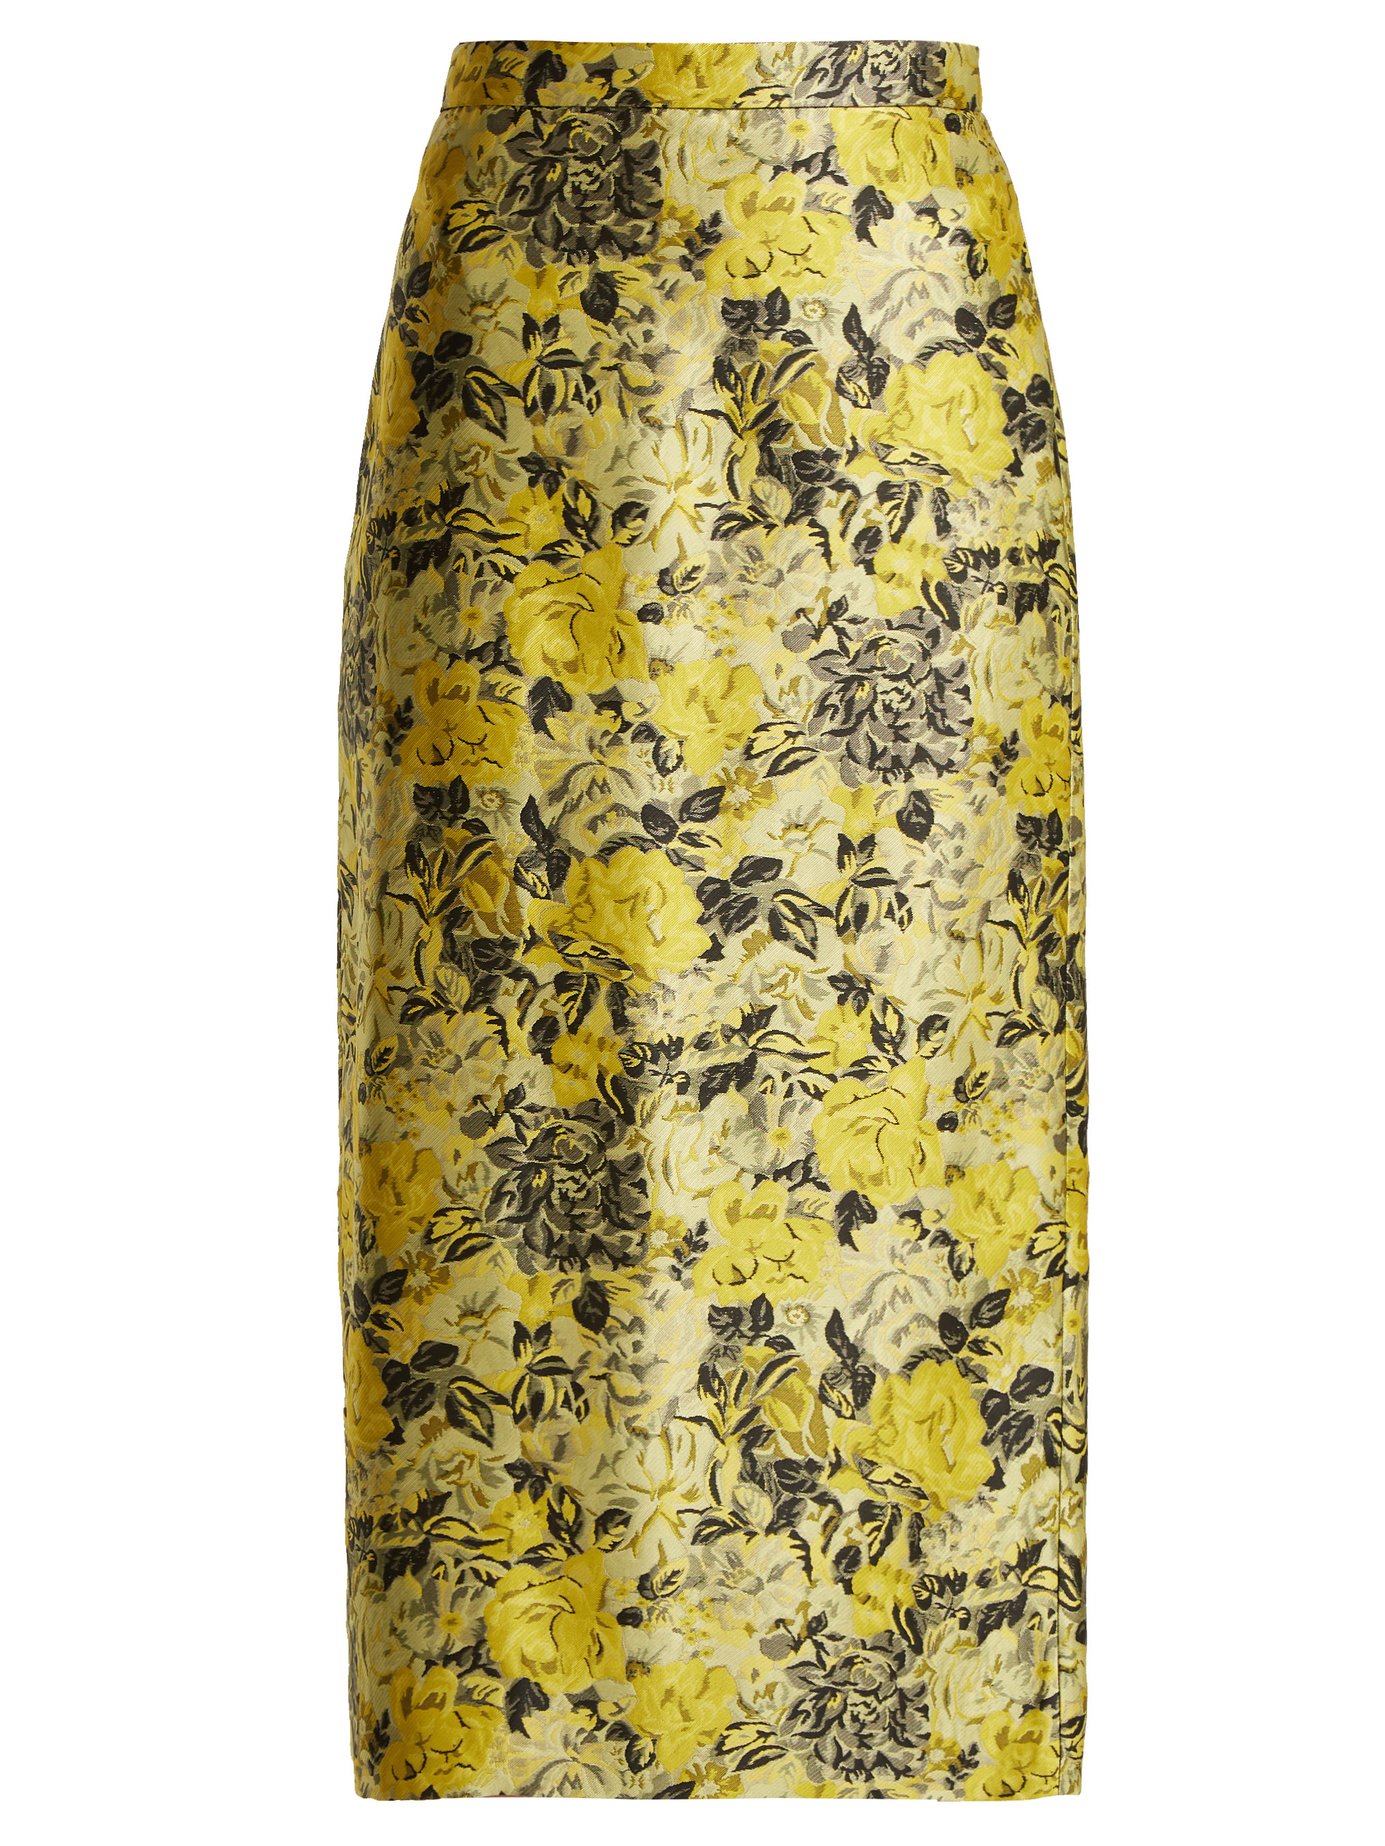 Best Pencil Skirts For Autumn | Fashion | MOJEH Magazine